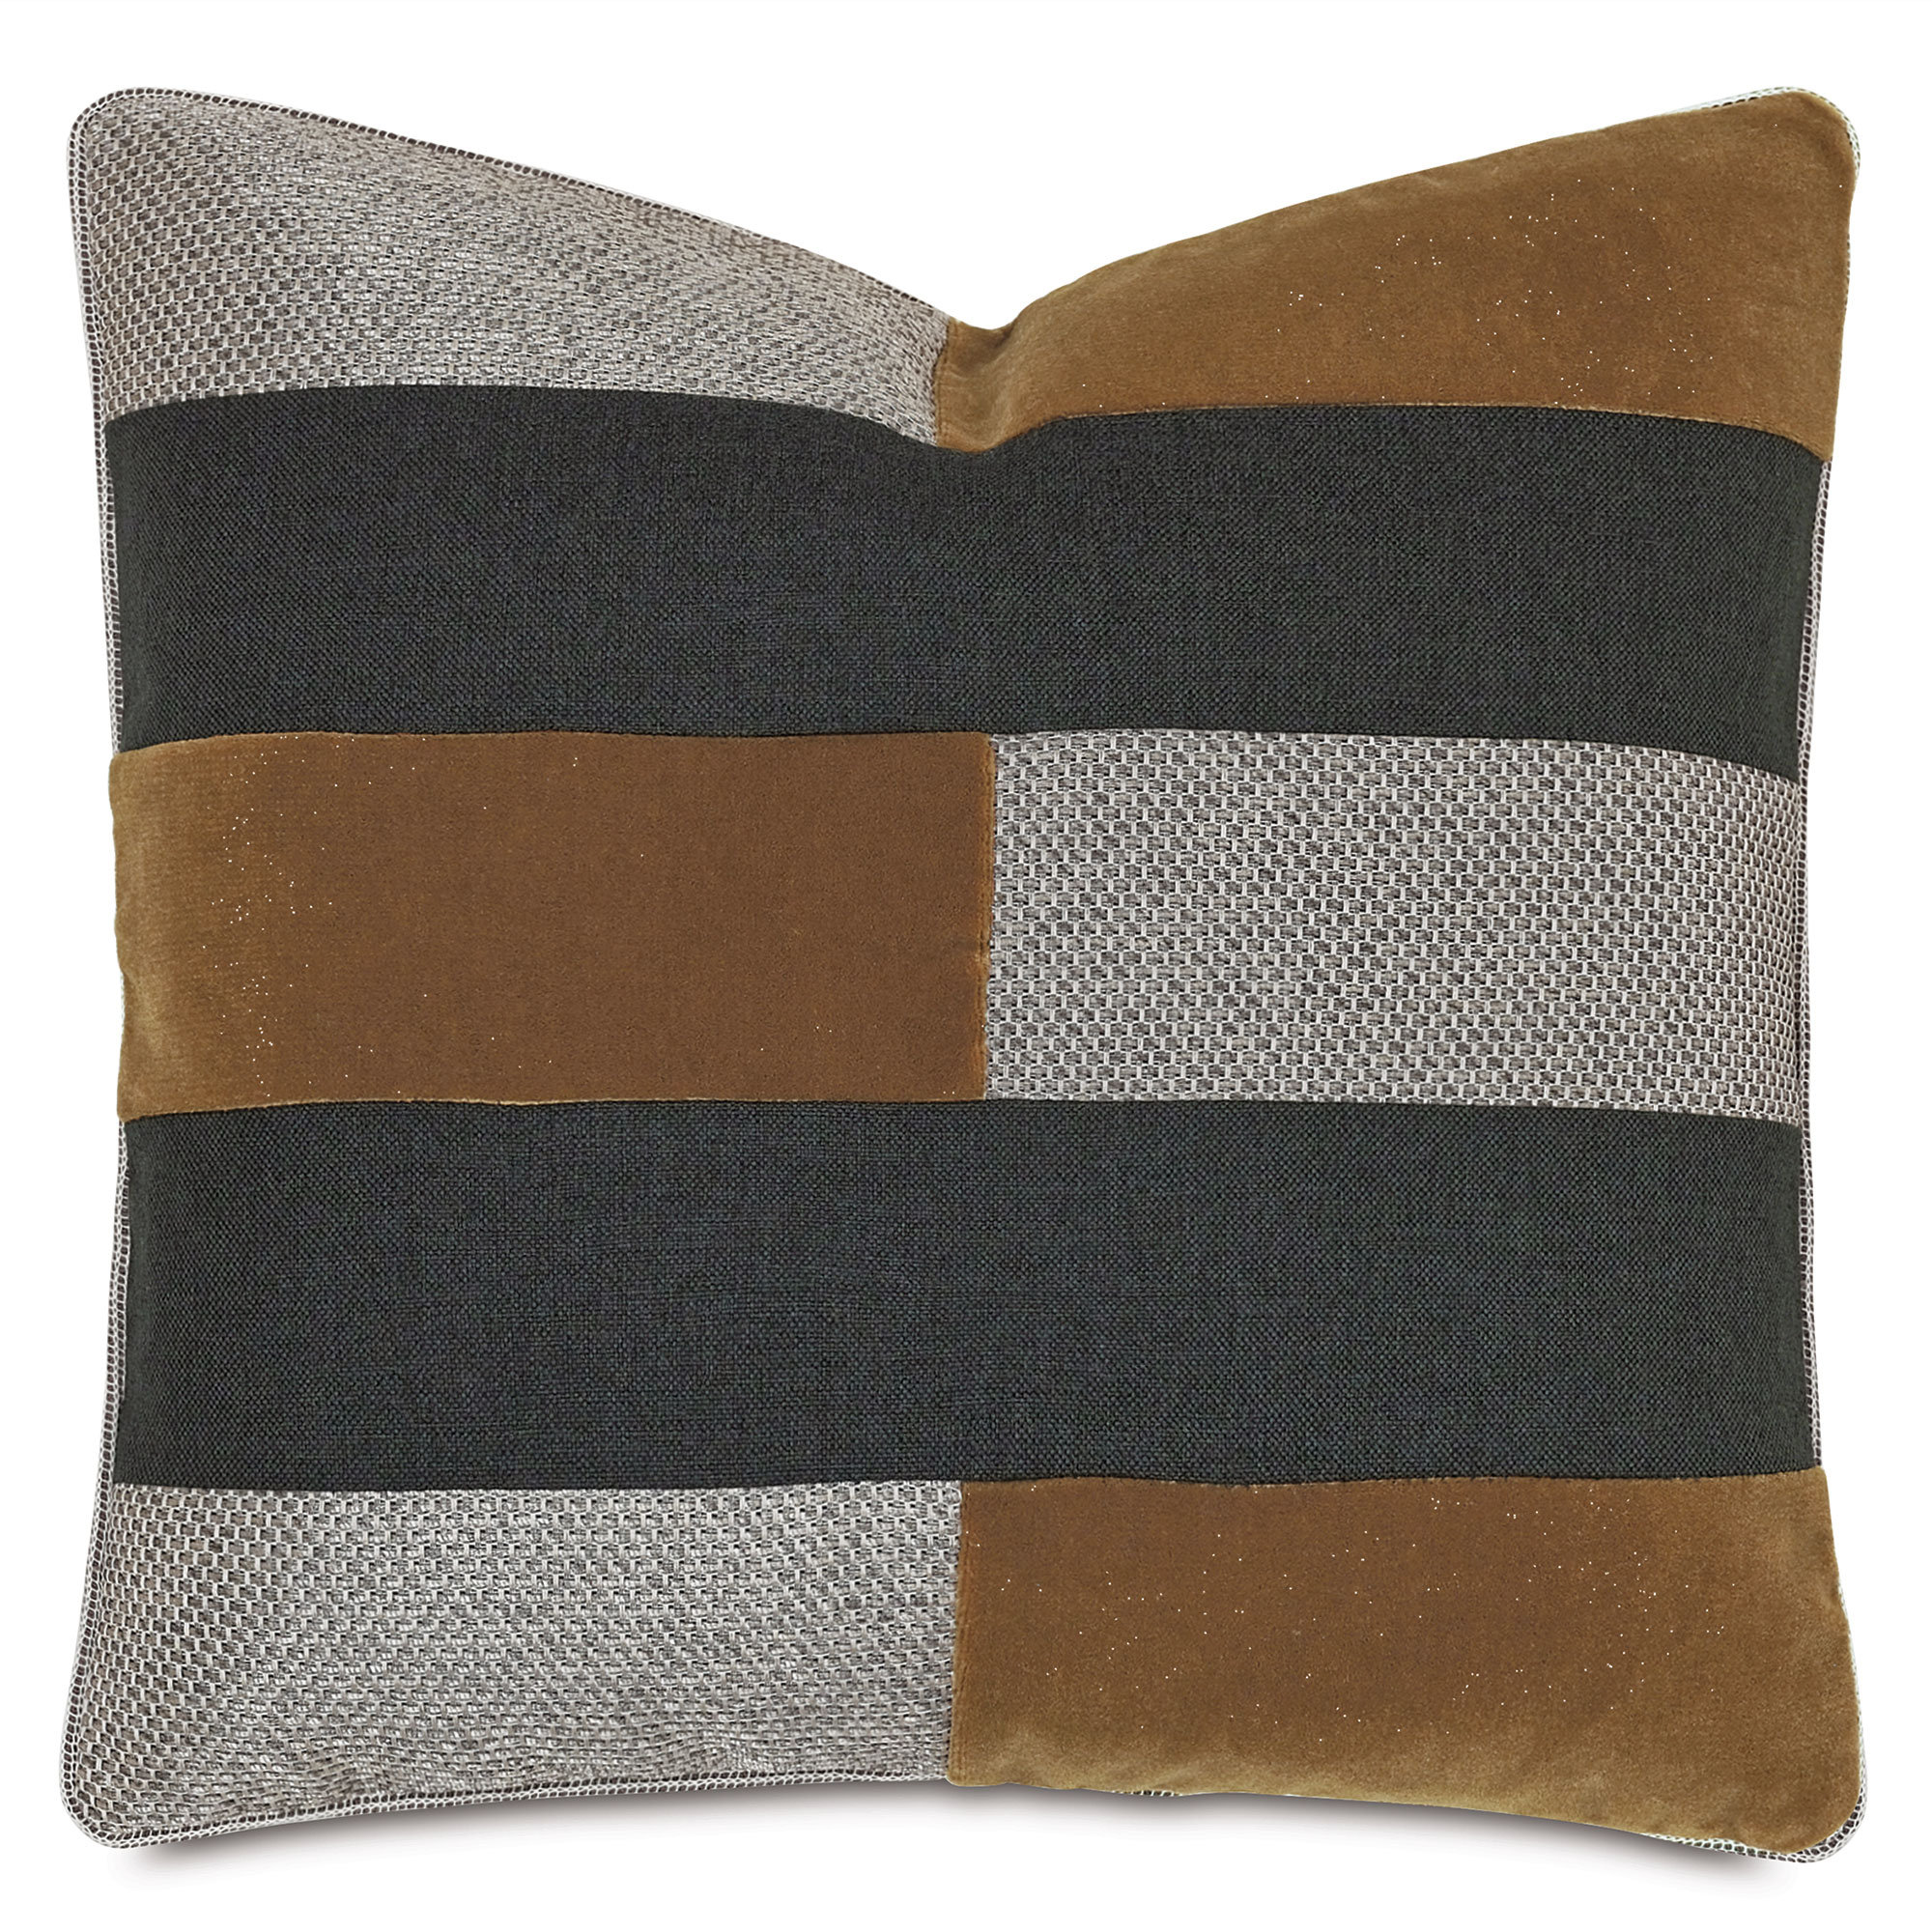 Taos Wool Blend Square Pillow | HiEnd Accents